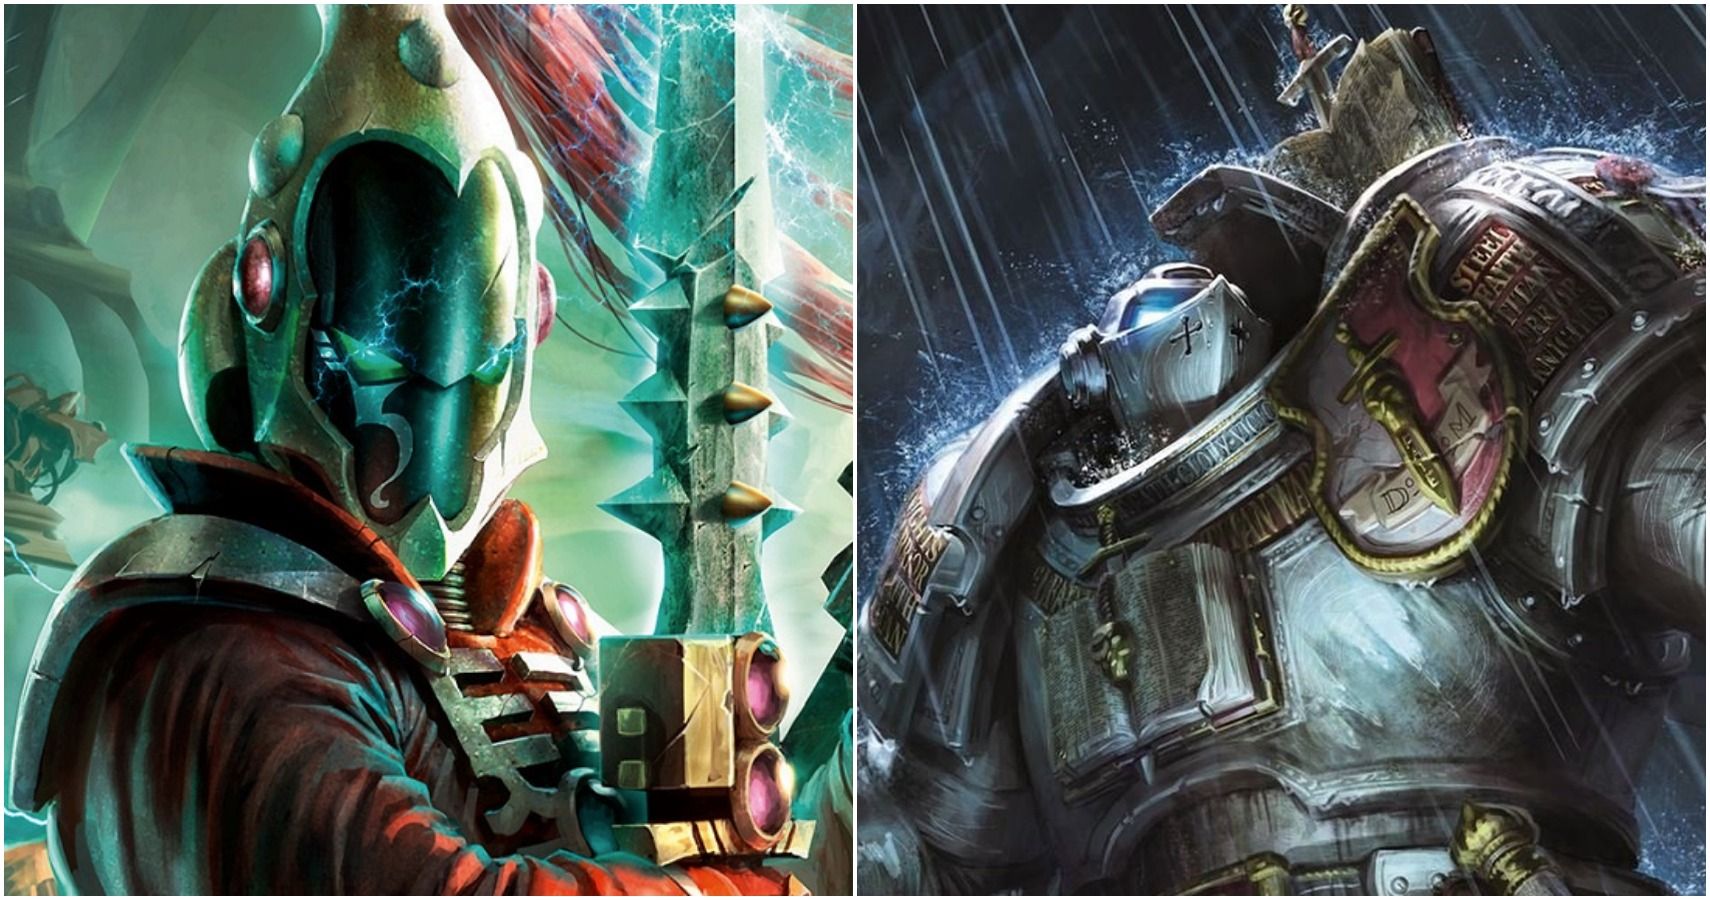 Which faction is known for its psychic support units in Warhammer 40K?